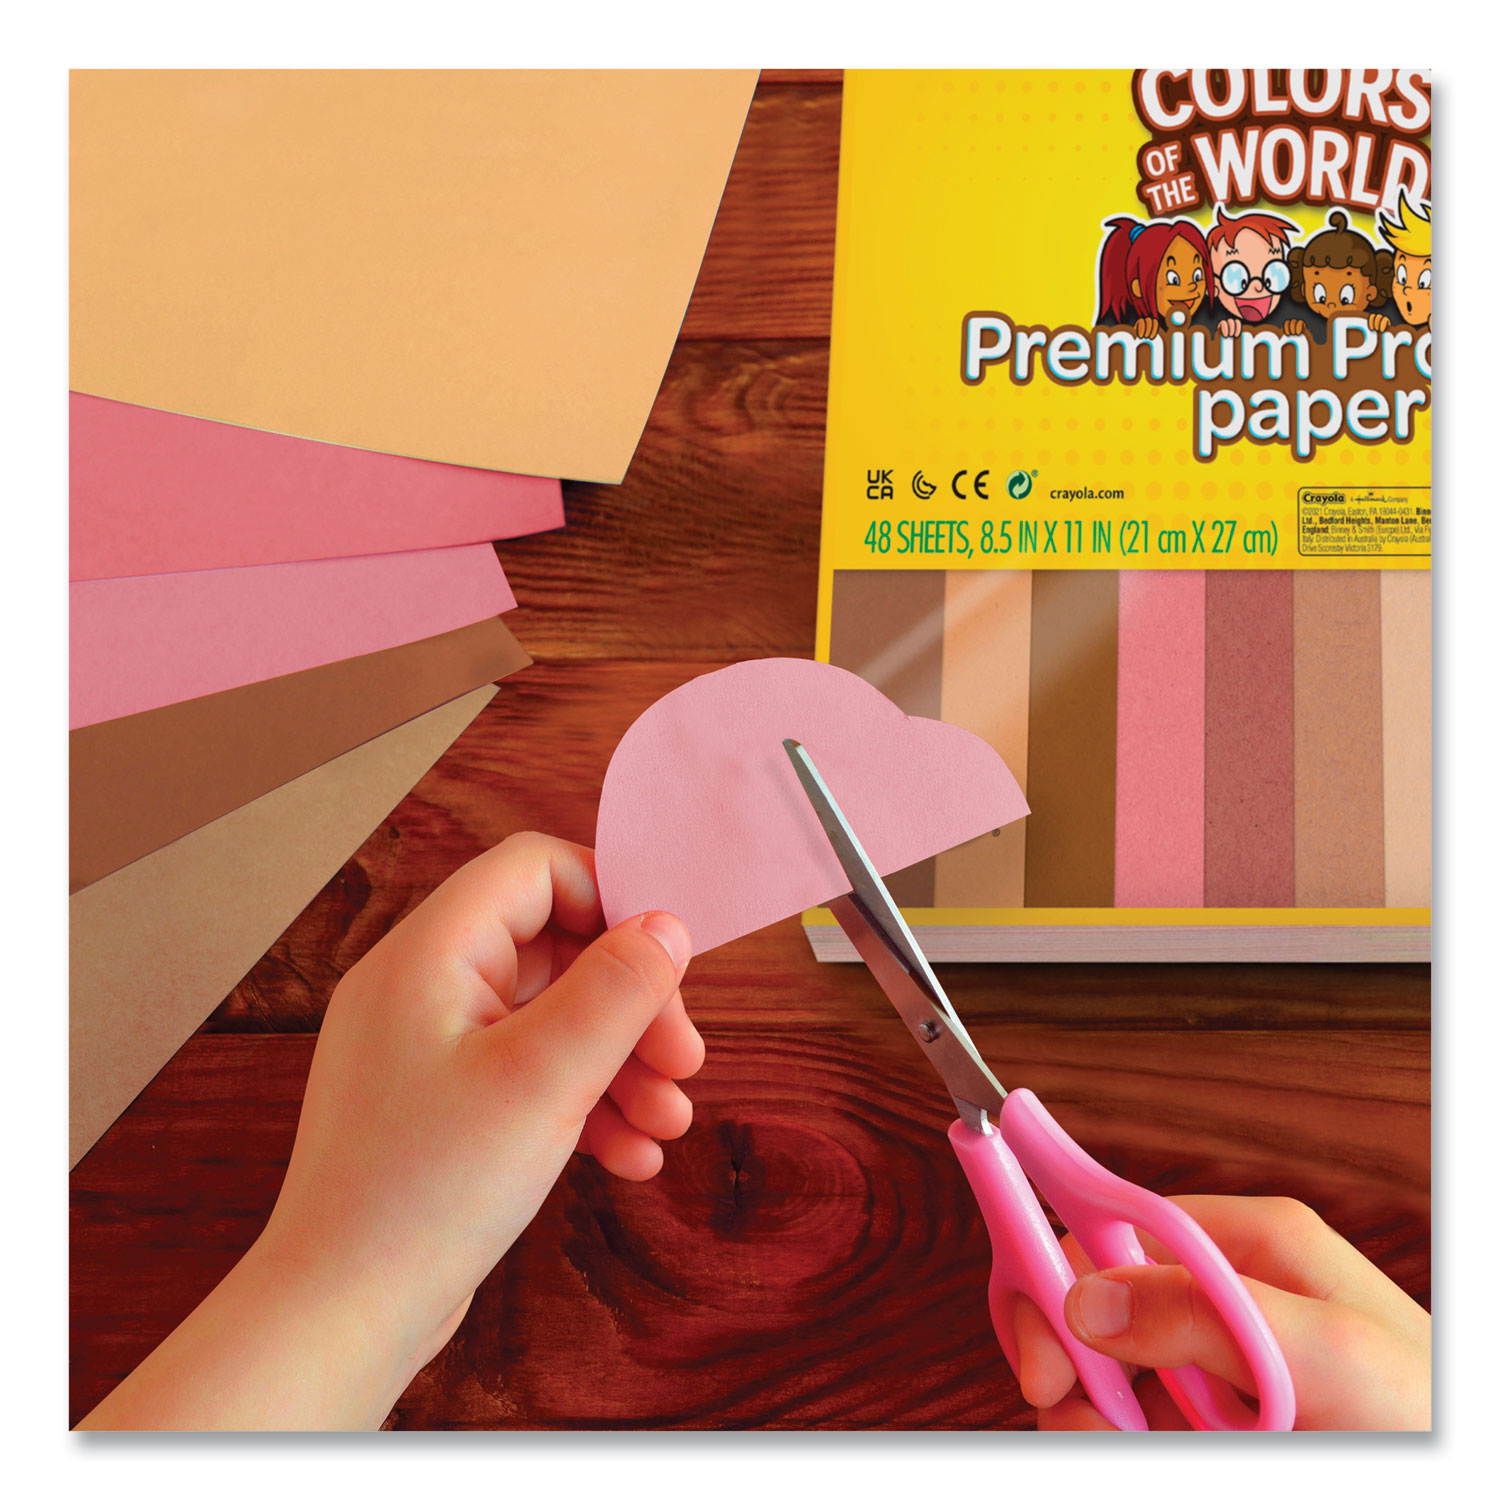 Crayola Construction Paper in Colors of The World, 8.5” x 11”, 24 Colors,  Craft Supplies, 48 Sheets